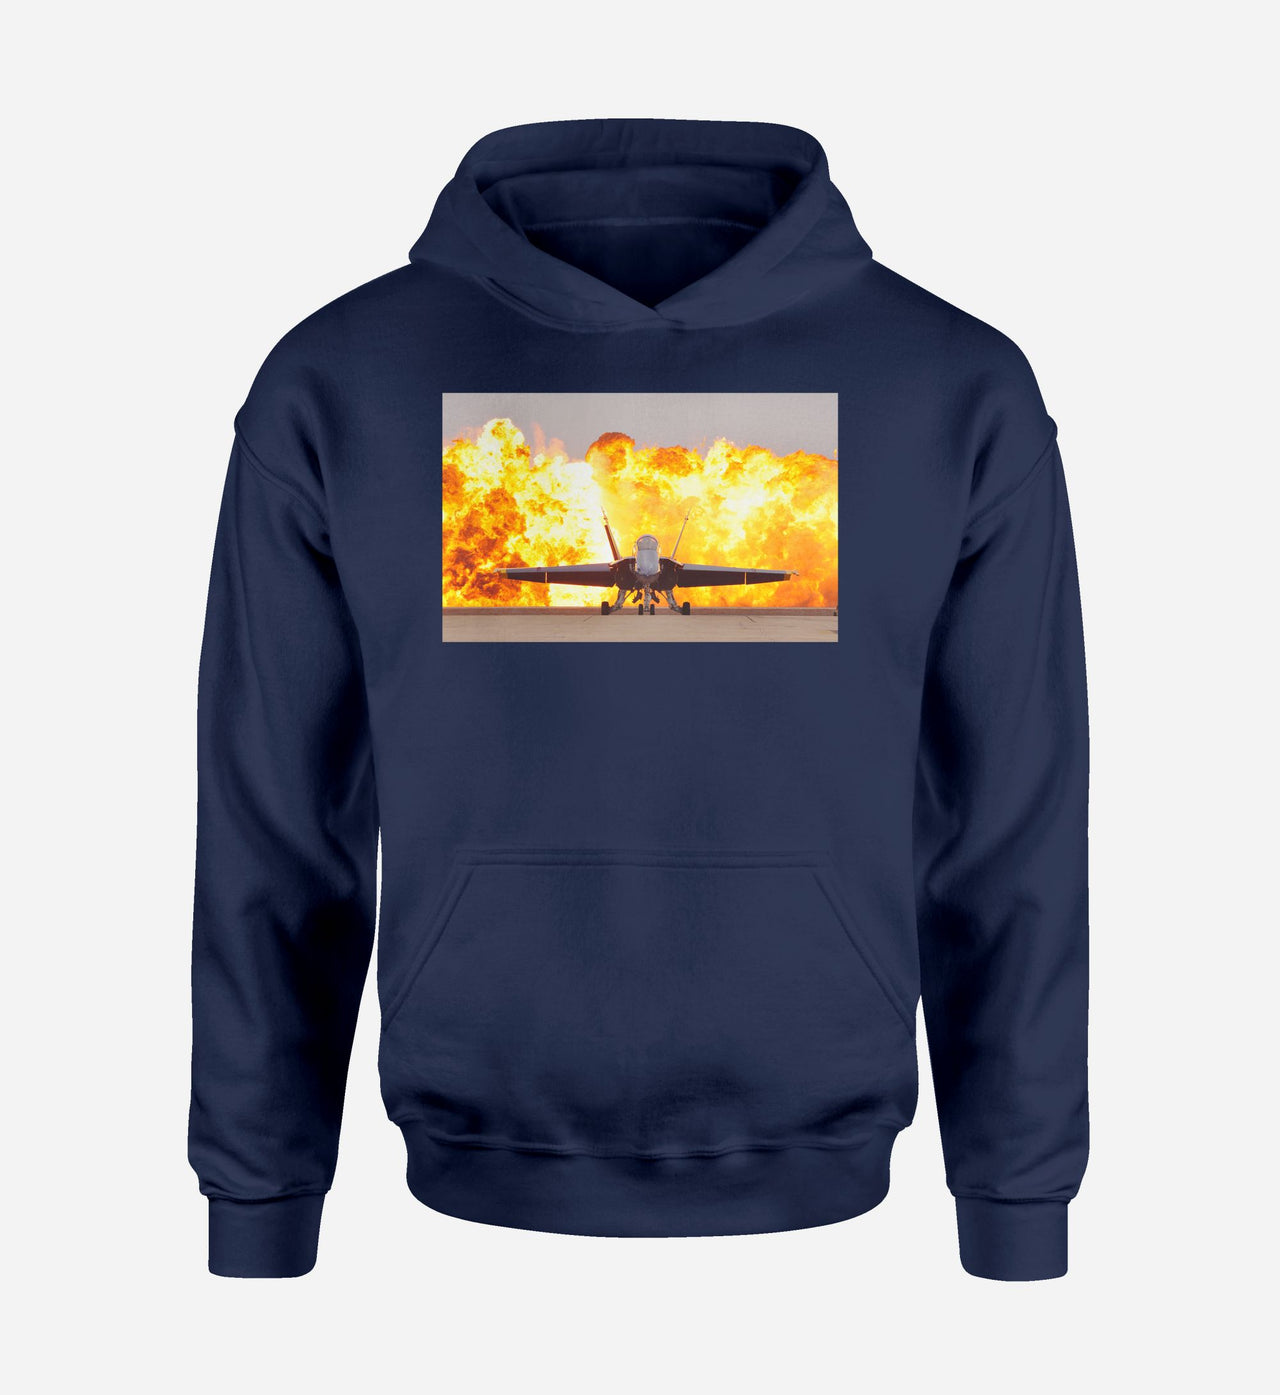 Face to Face with Air Force Jet & Flames Designed Hoodies